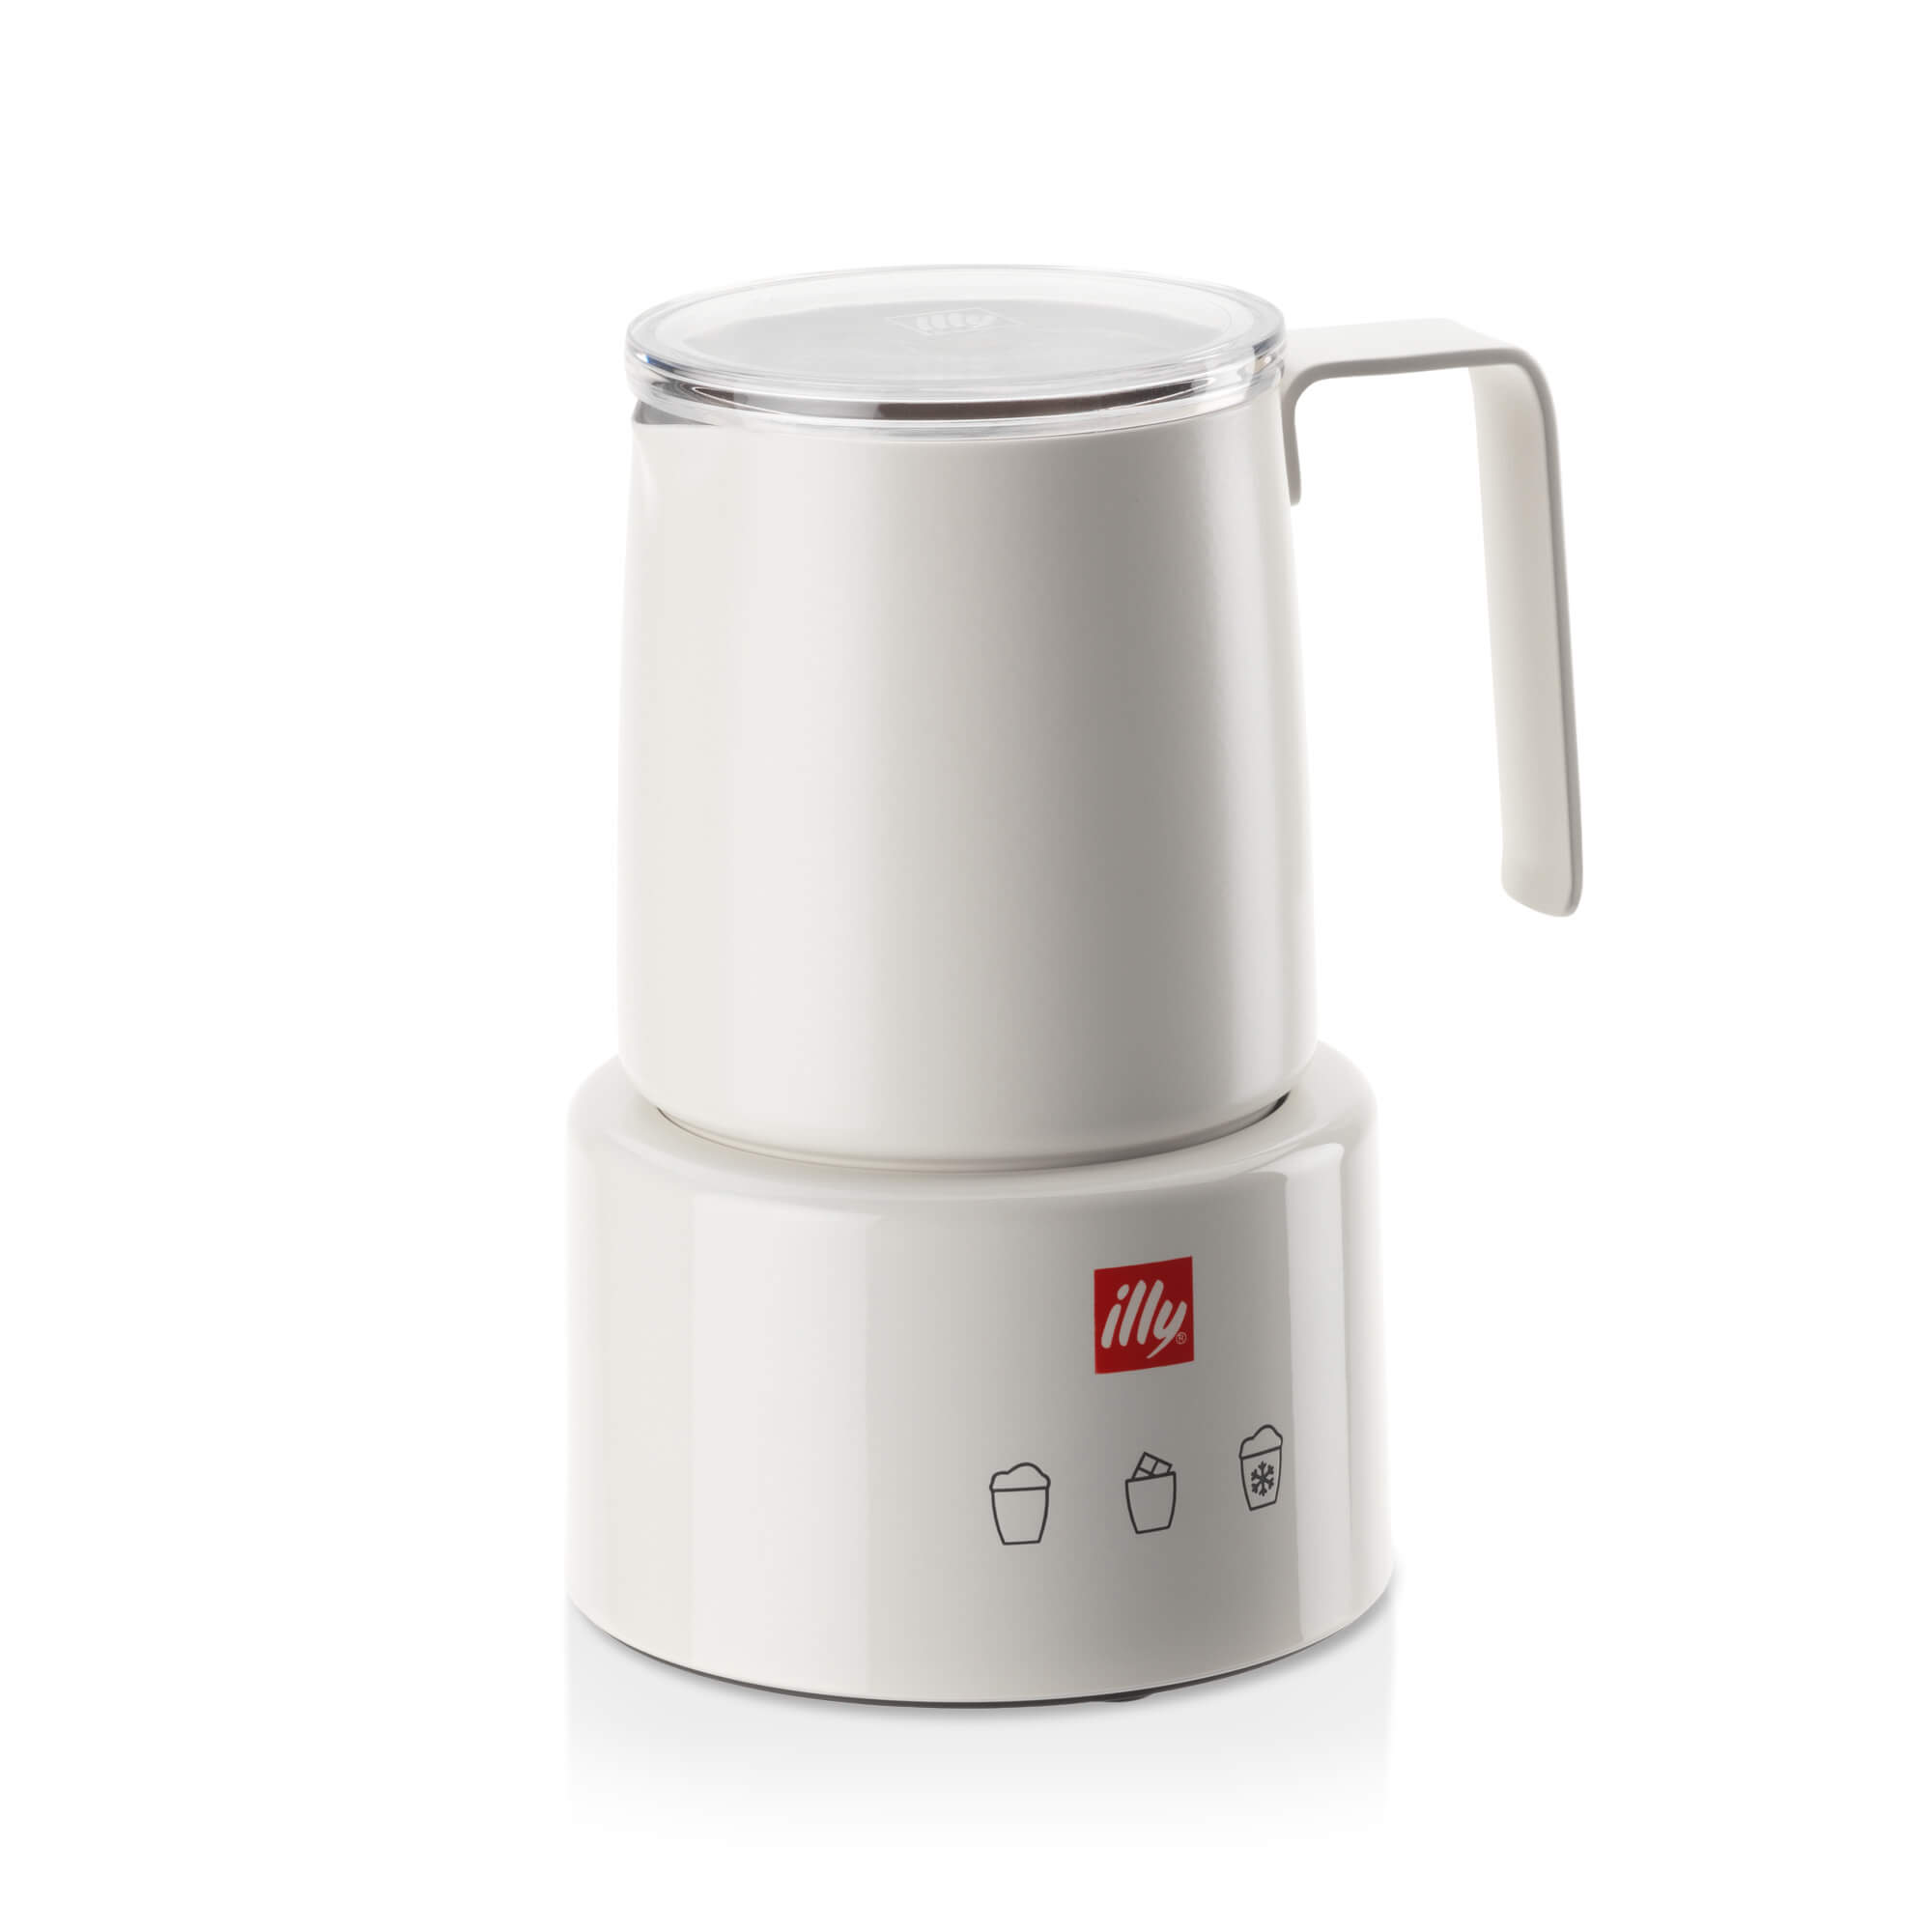 illy Electric Milk Frother Λευκό, Αξεσουάρ Καφέ, 02-07-0102